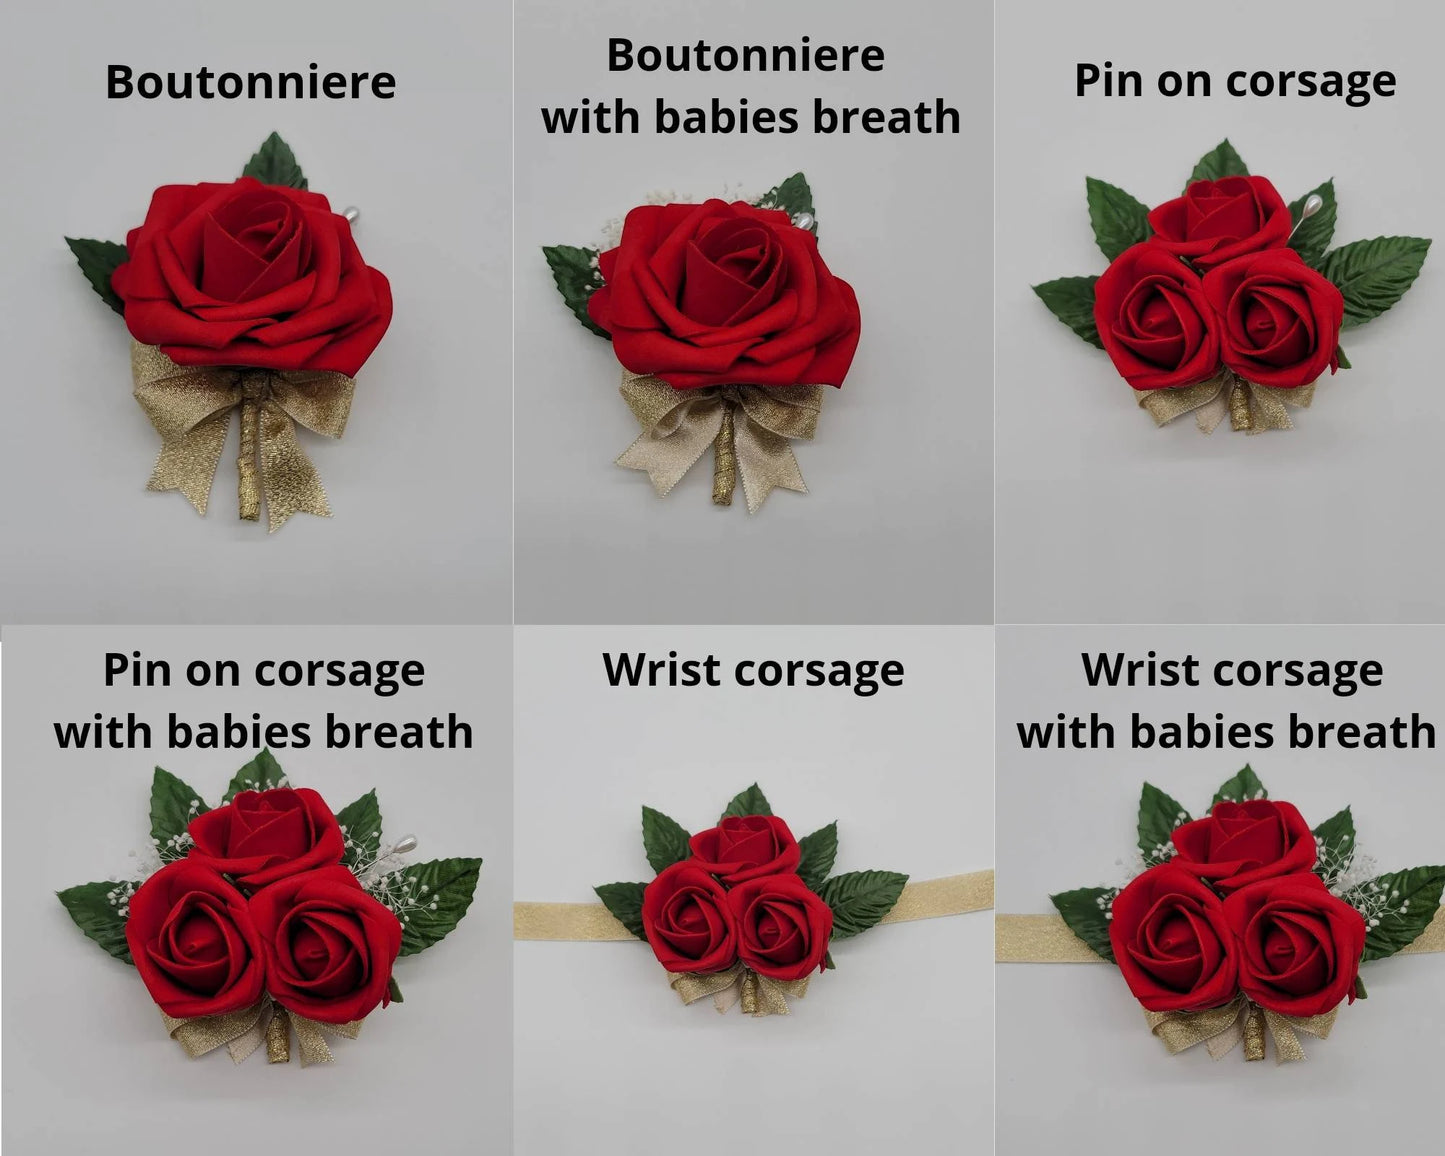 Red and Black Boutonnieres and Corsages